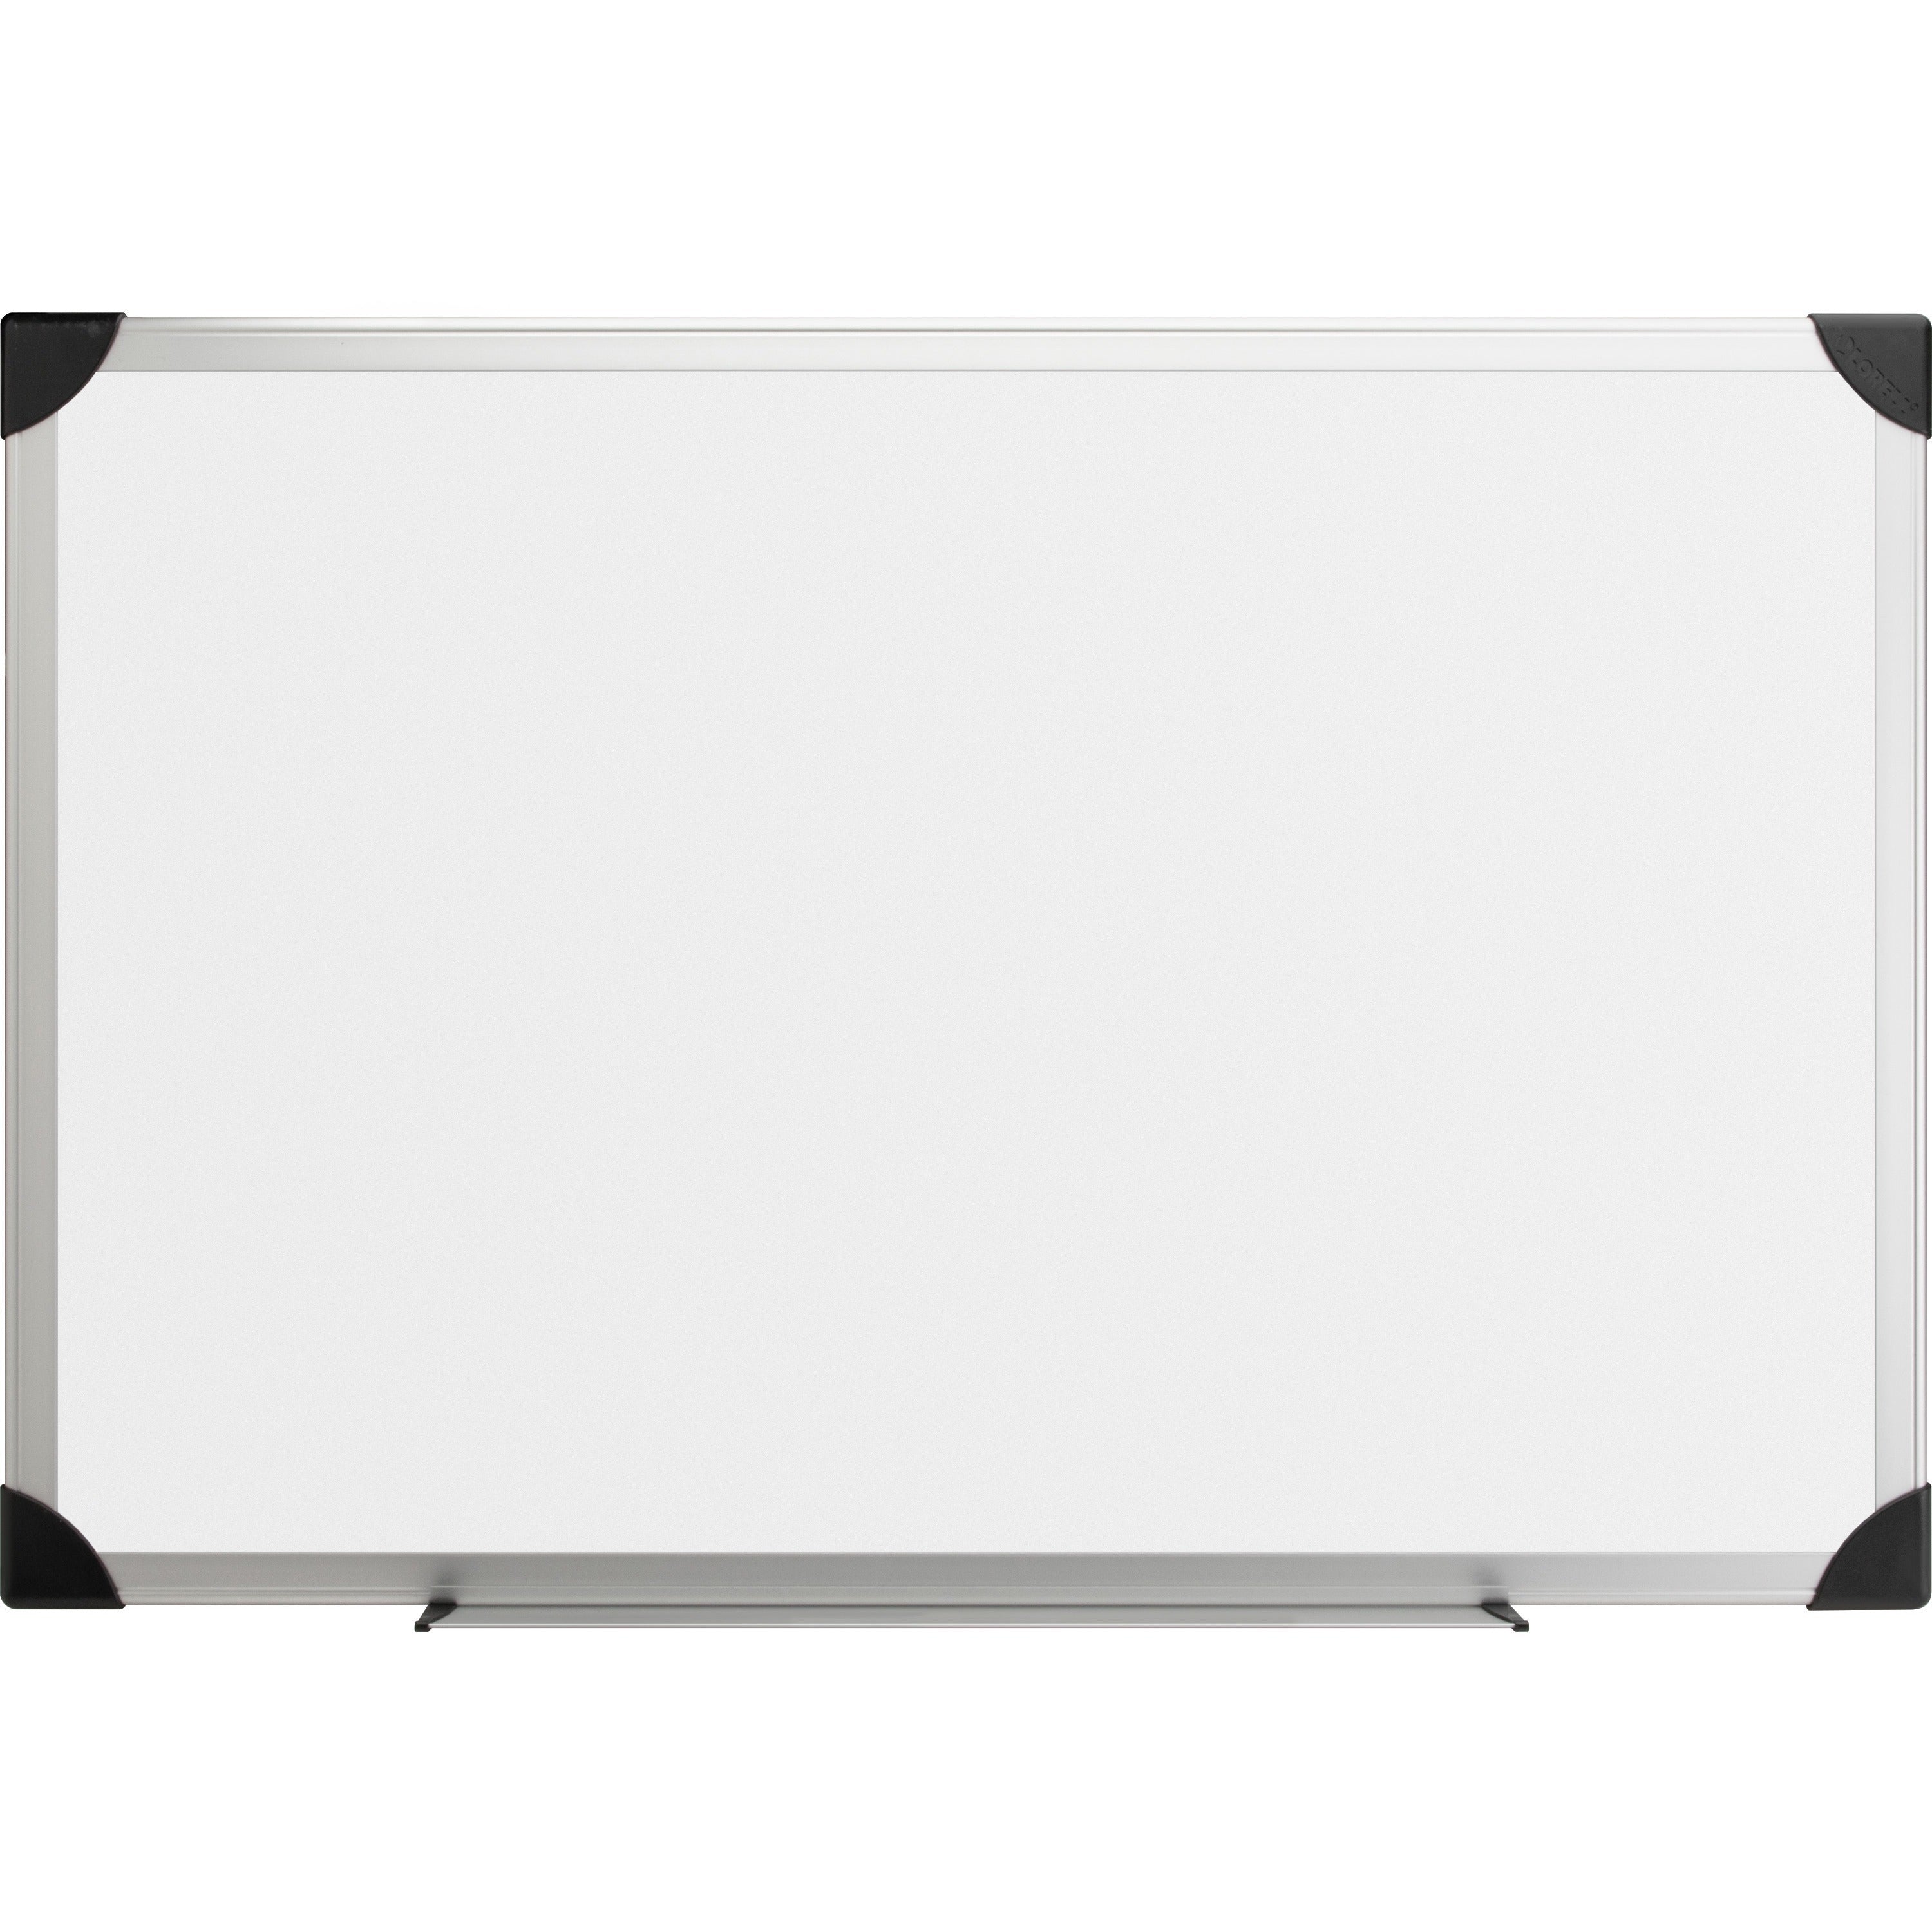 Lorell Dry-erase Board - 96" (8 ft) Width x 48" (4 ft) Height - White Styrene Surface - Aluminum Frame - Ghost Resistant, Scratch Resistant - 1 Each - 